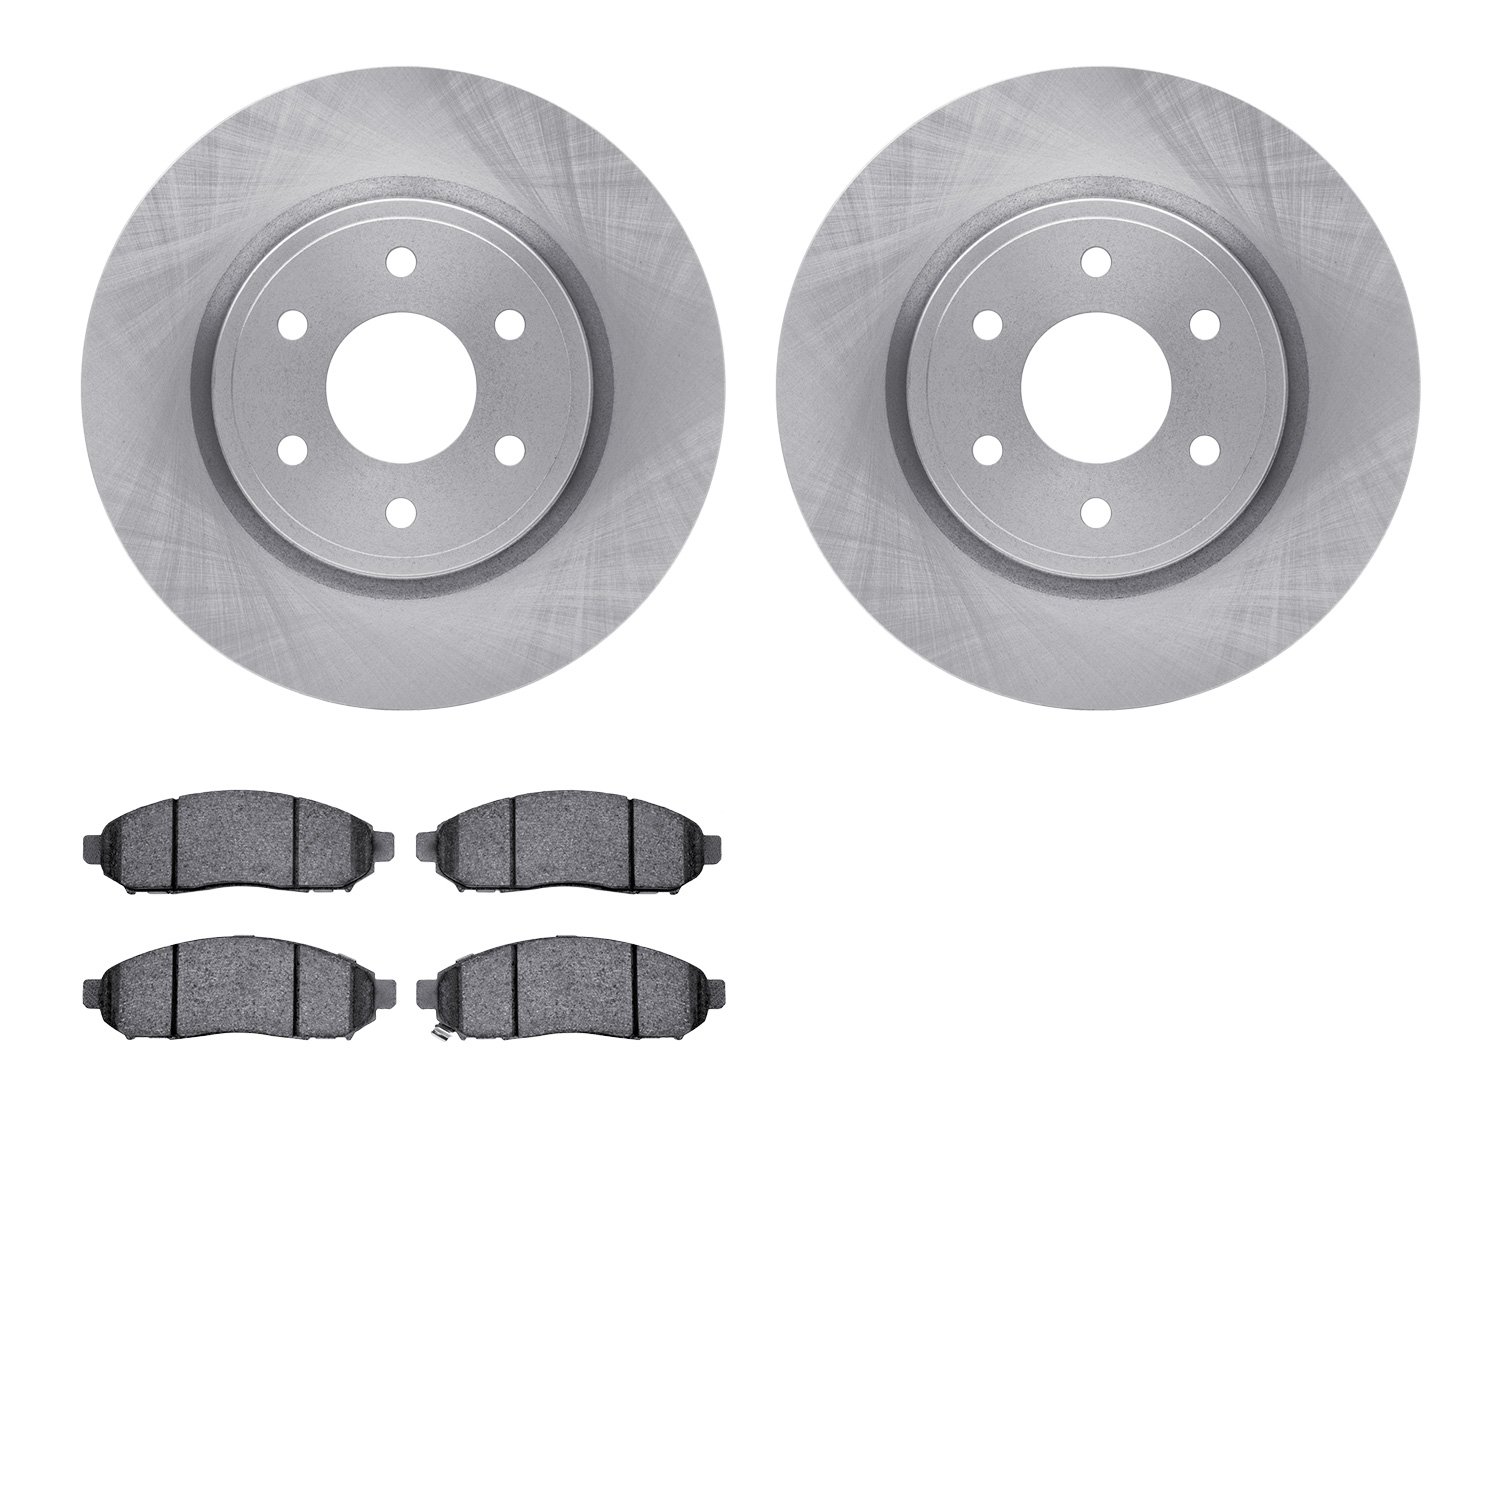 6302-67107 Brake Rotors with 3000-Series Ceramic Brake Pads Kit, Fits Select Multiple Makes/Models, Position: Front